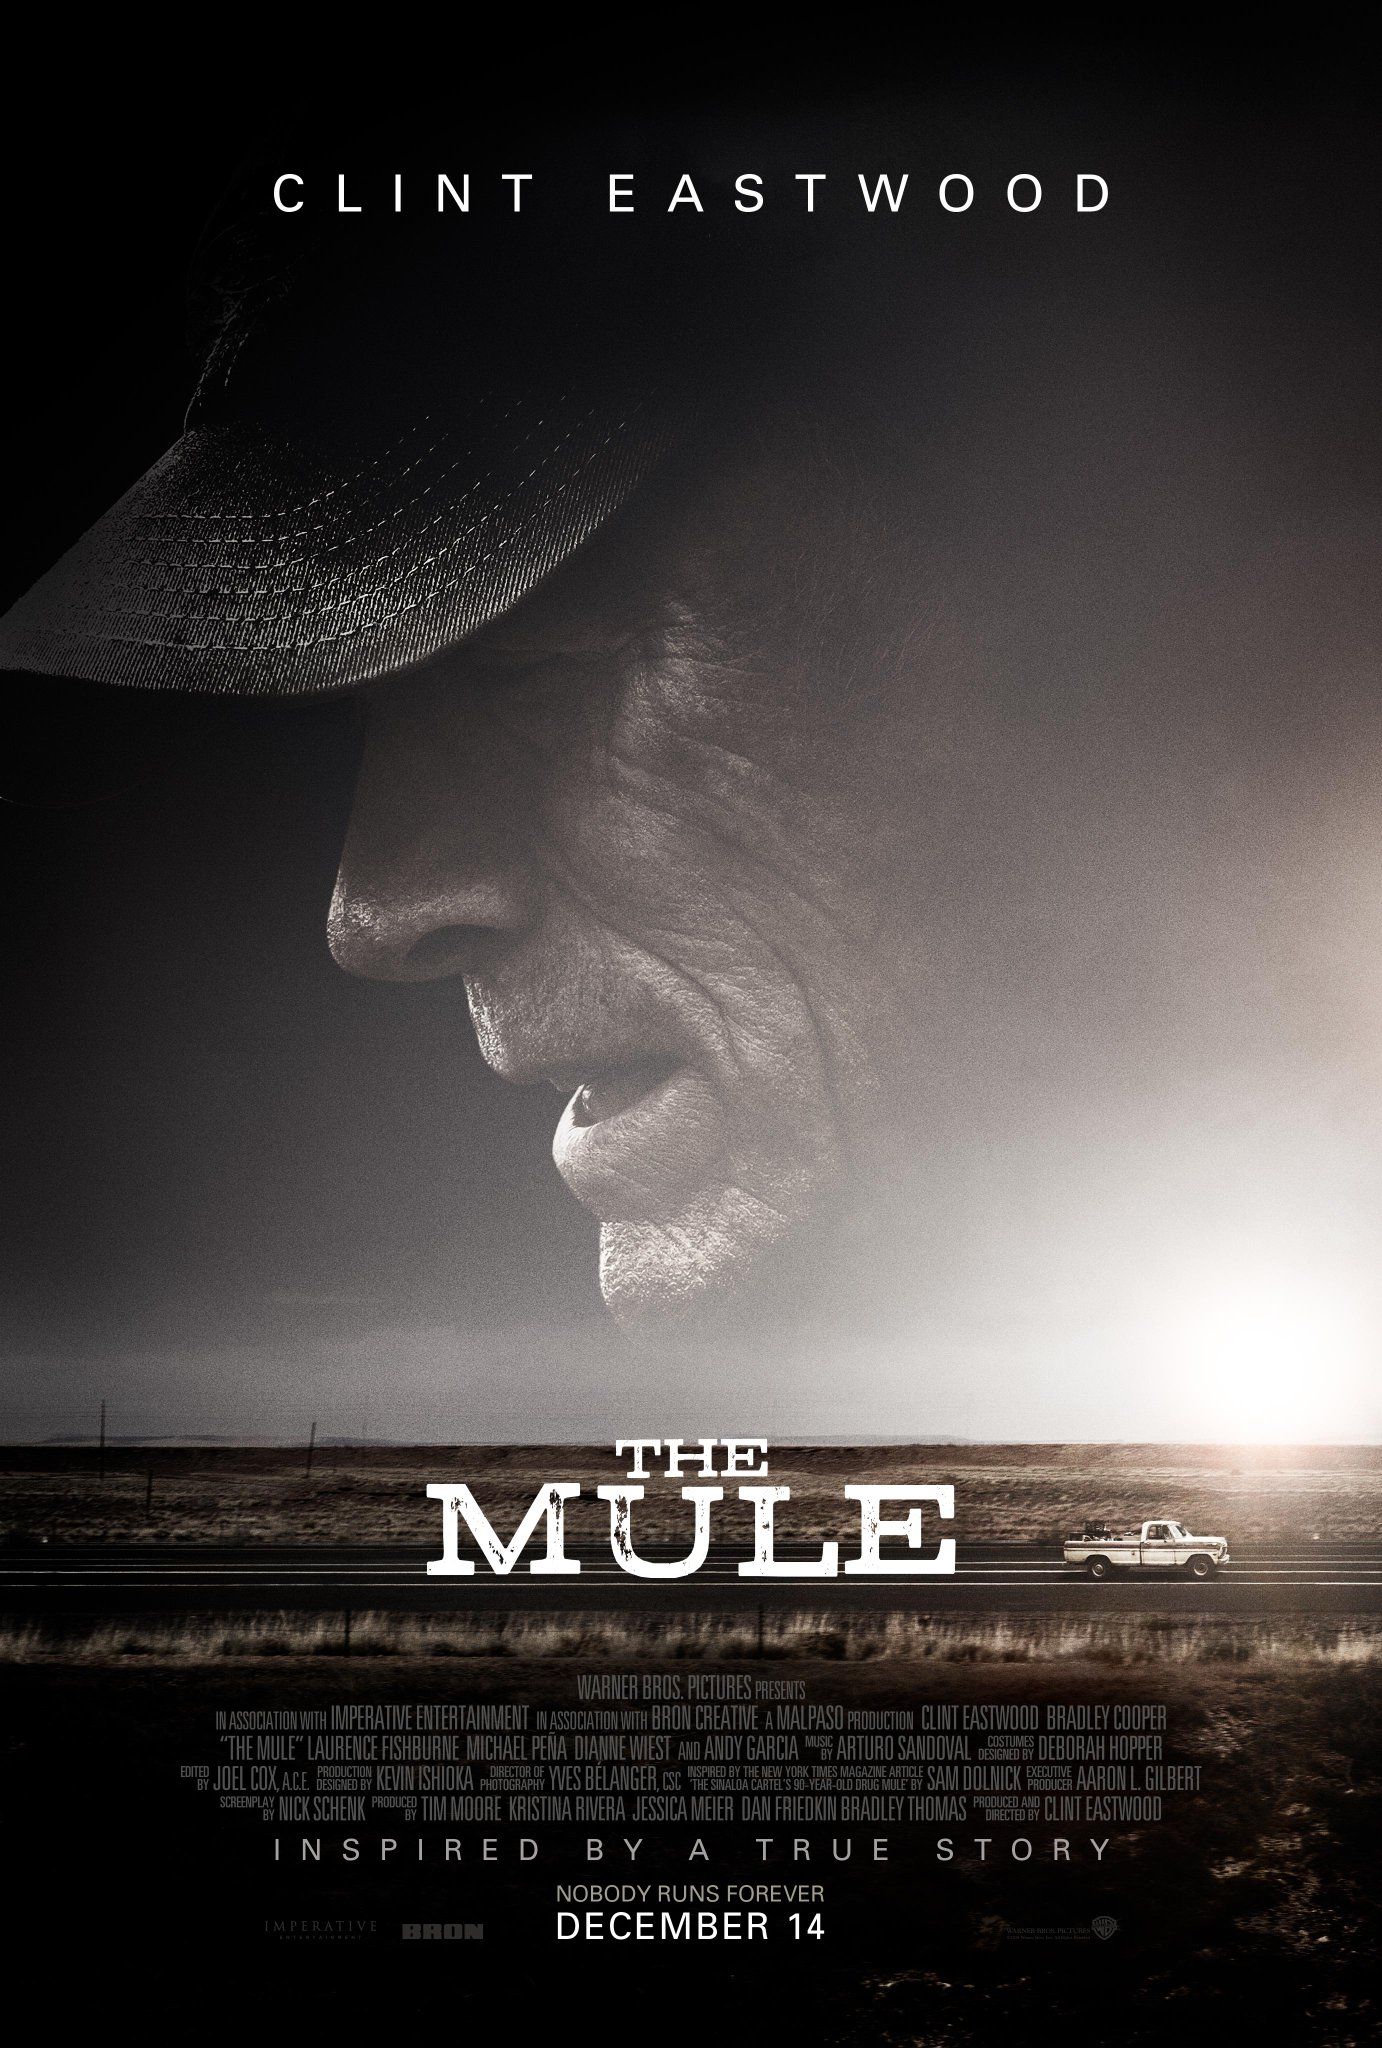 The Mule Poster Teases Clint Eastwood's New Film | Collider1382 x 2048